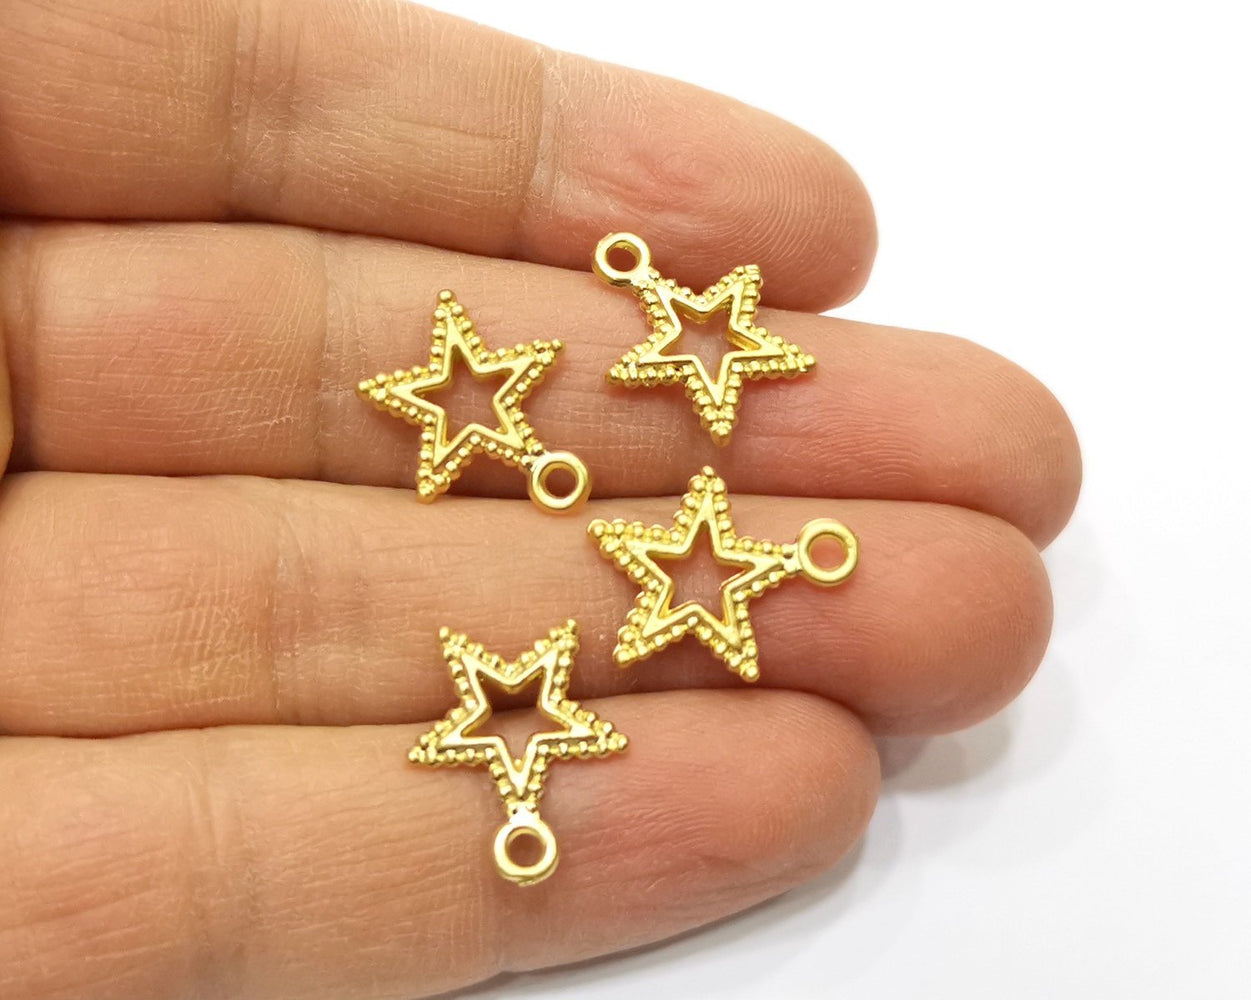 10 Star Charms Gold Plated Charms  (17x15mm)  G17590